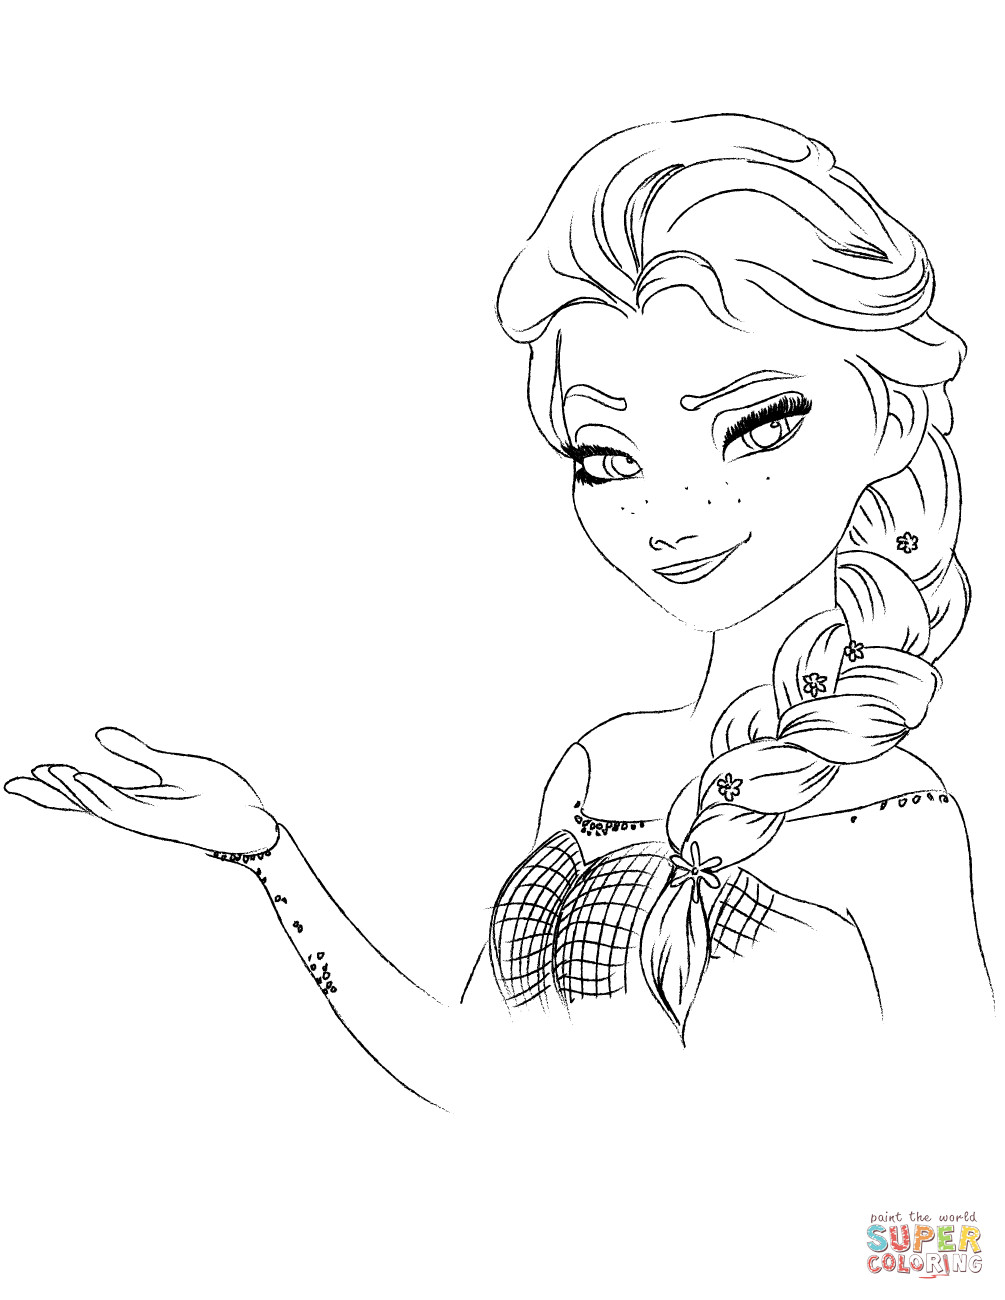 Printable Coloring Pages Frozen
 Elsa from The Frozen coloring page